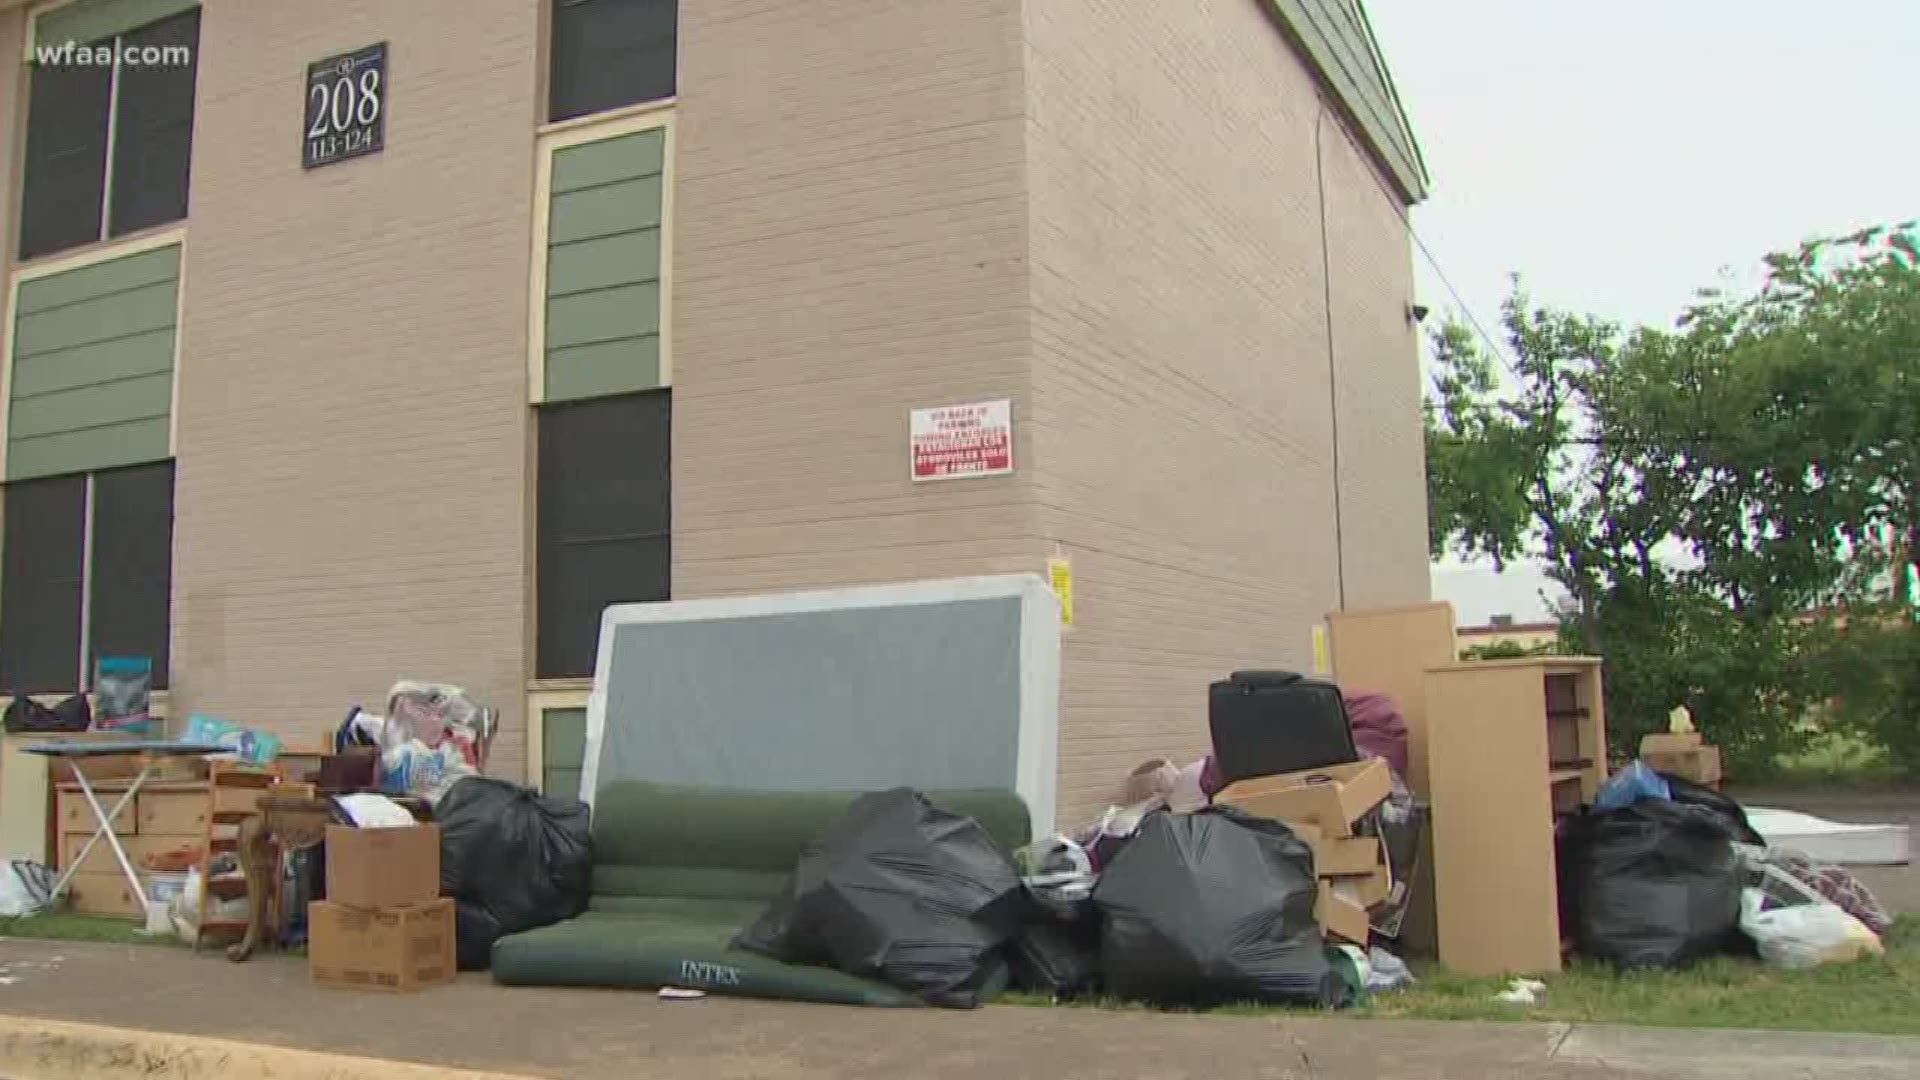 Piles of bed-bug infested furniture was thrown out of the Spanish Villas apartments.